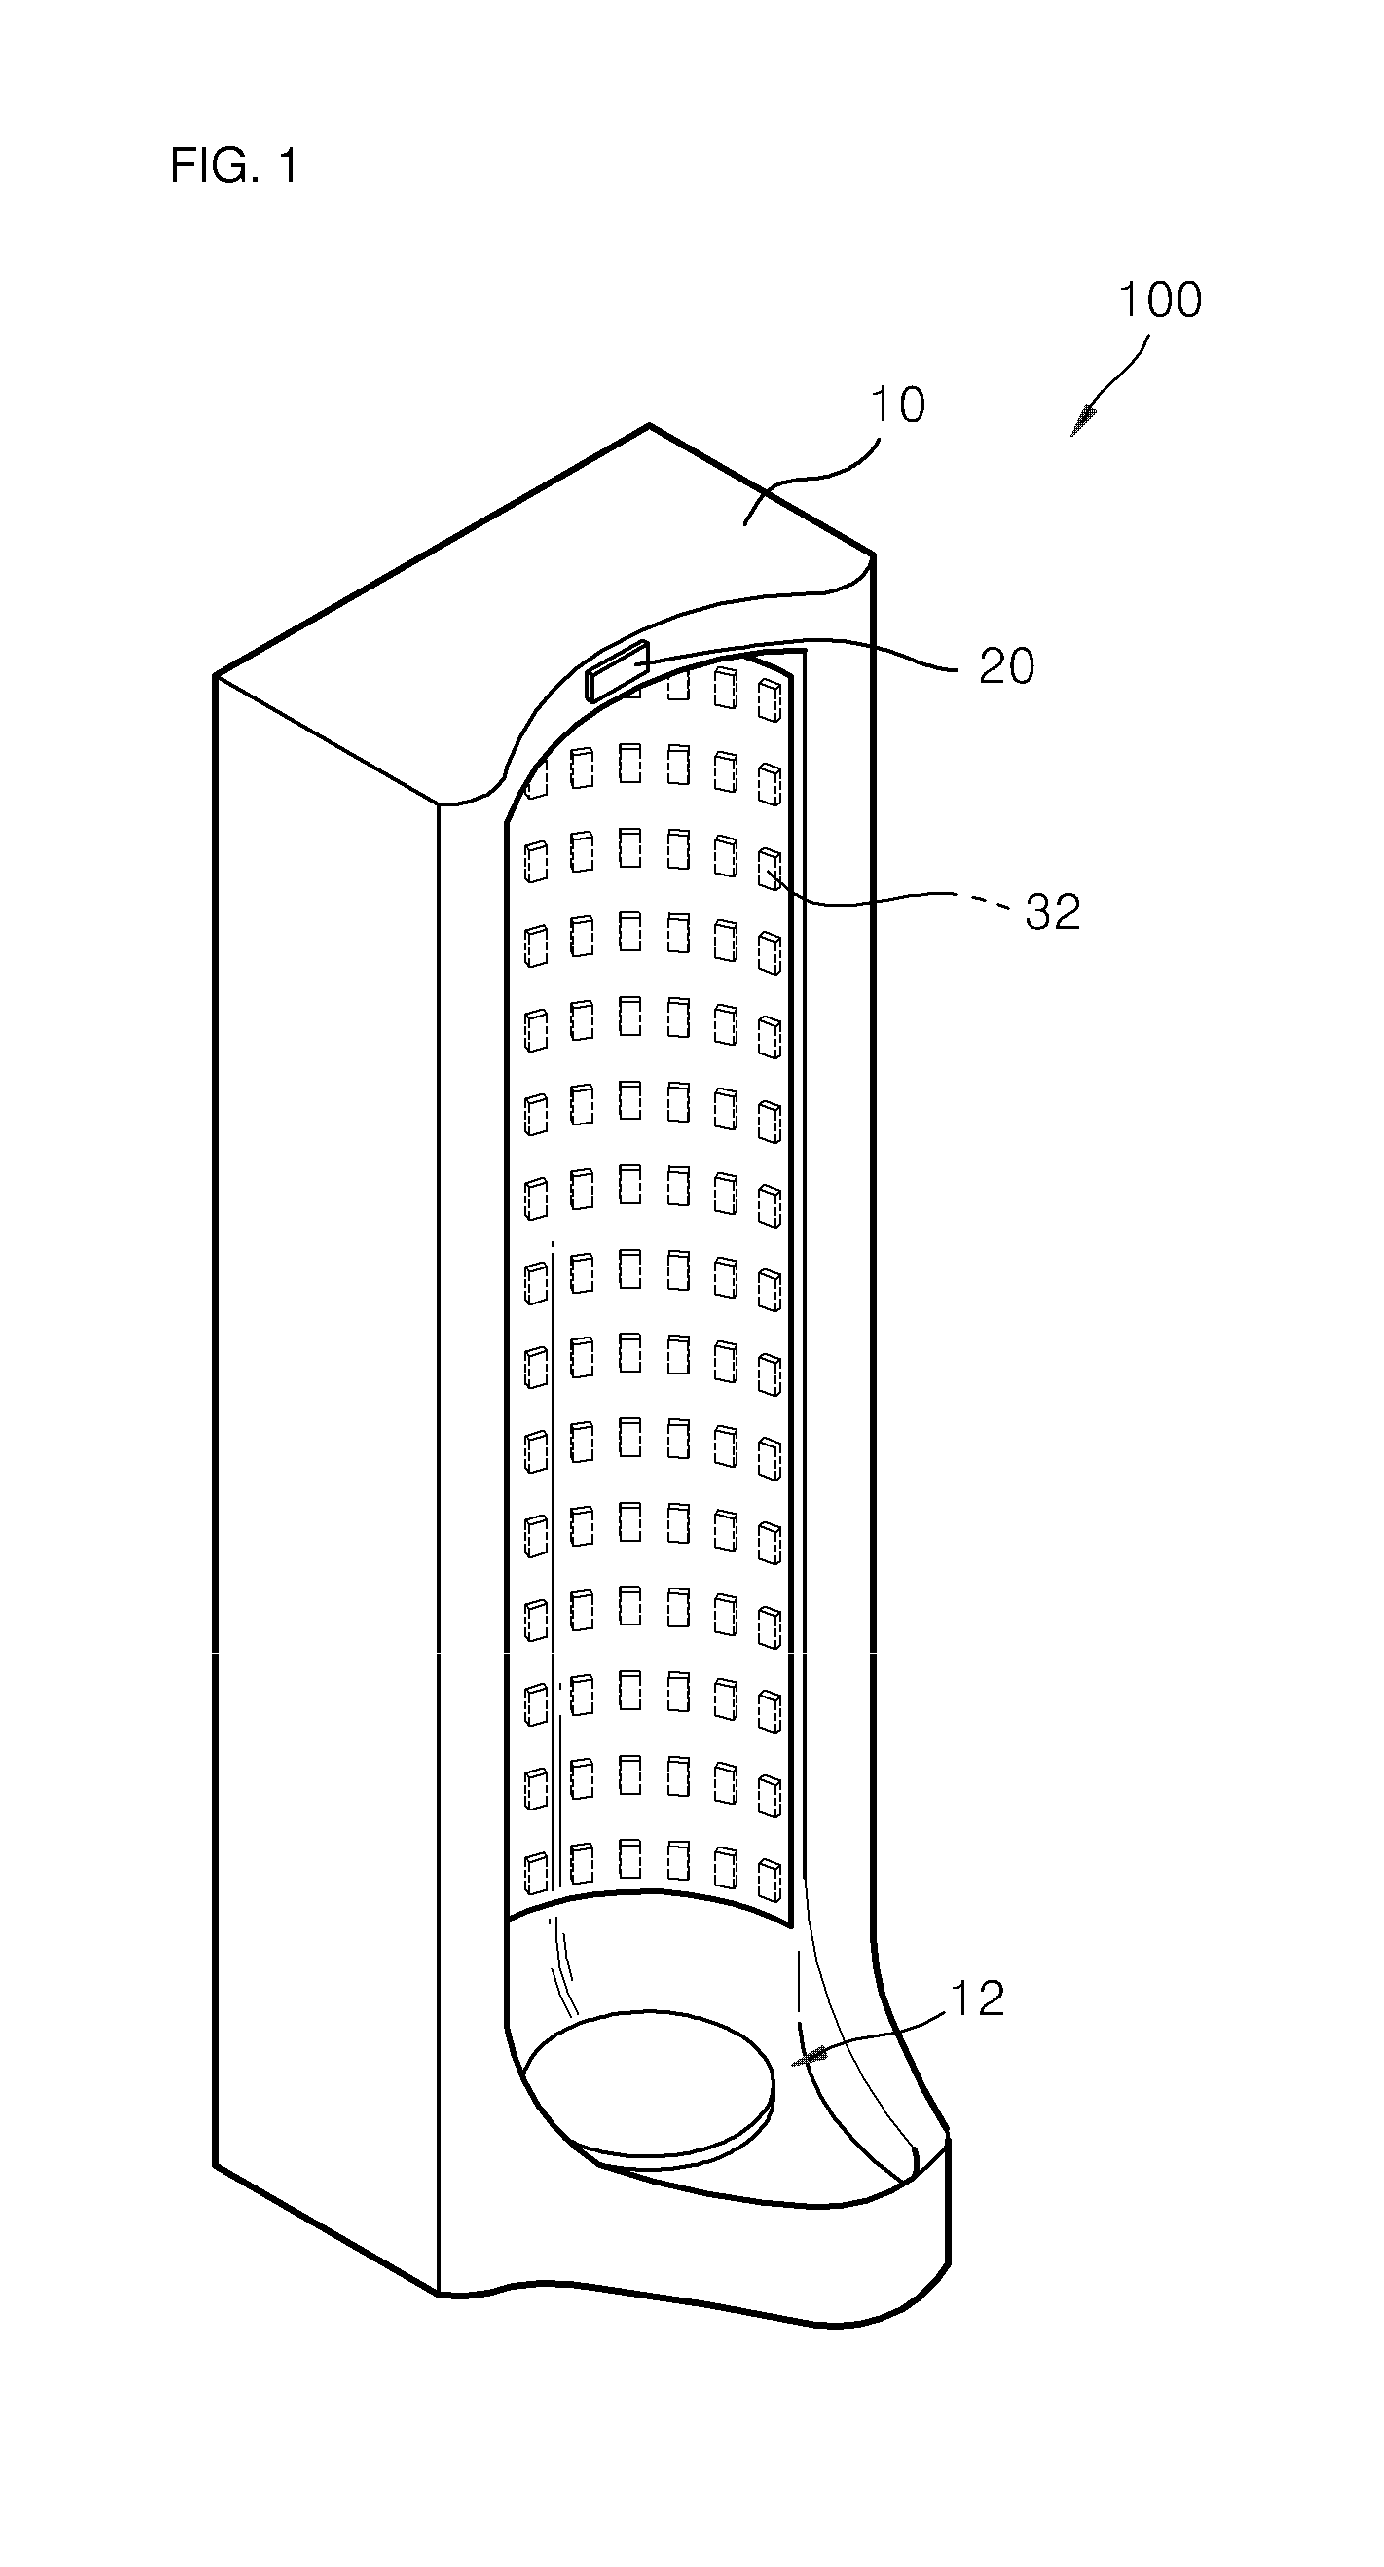 Urinal where imaging device is installed